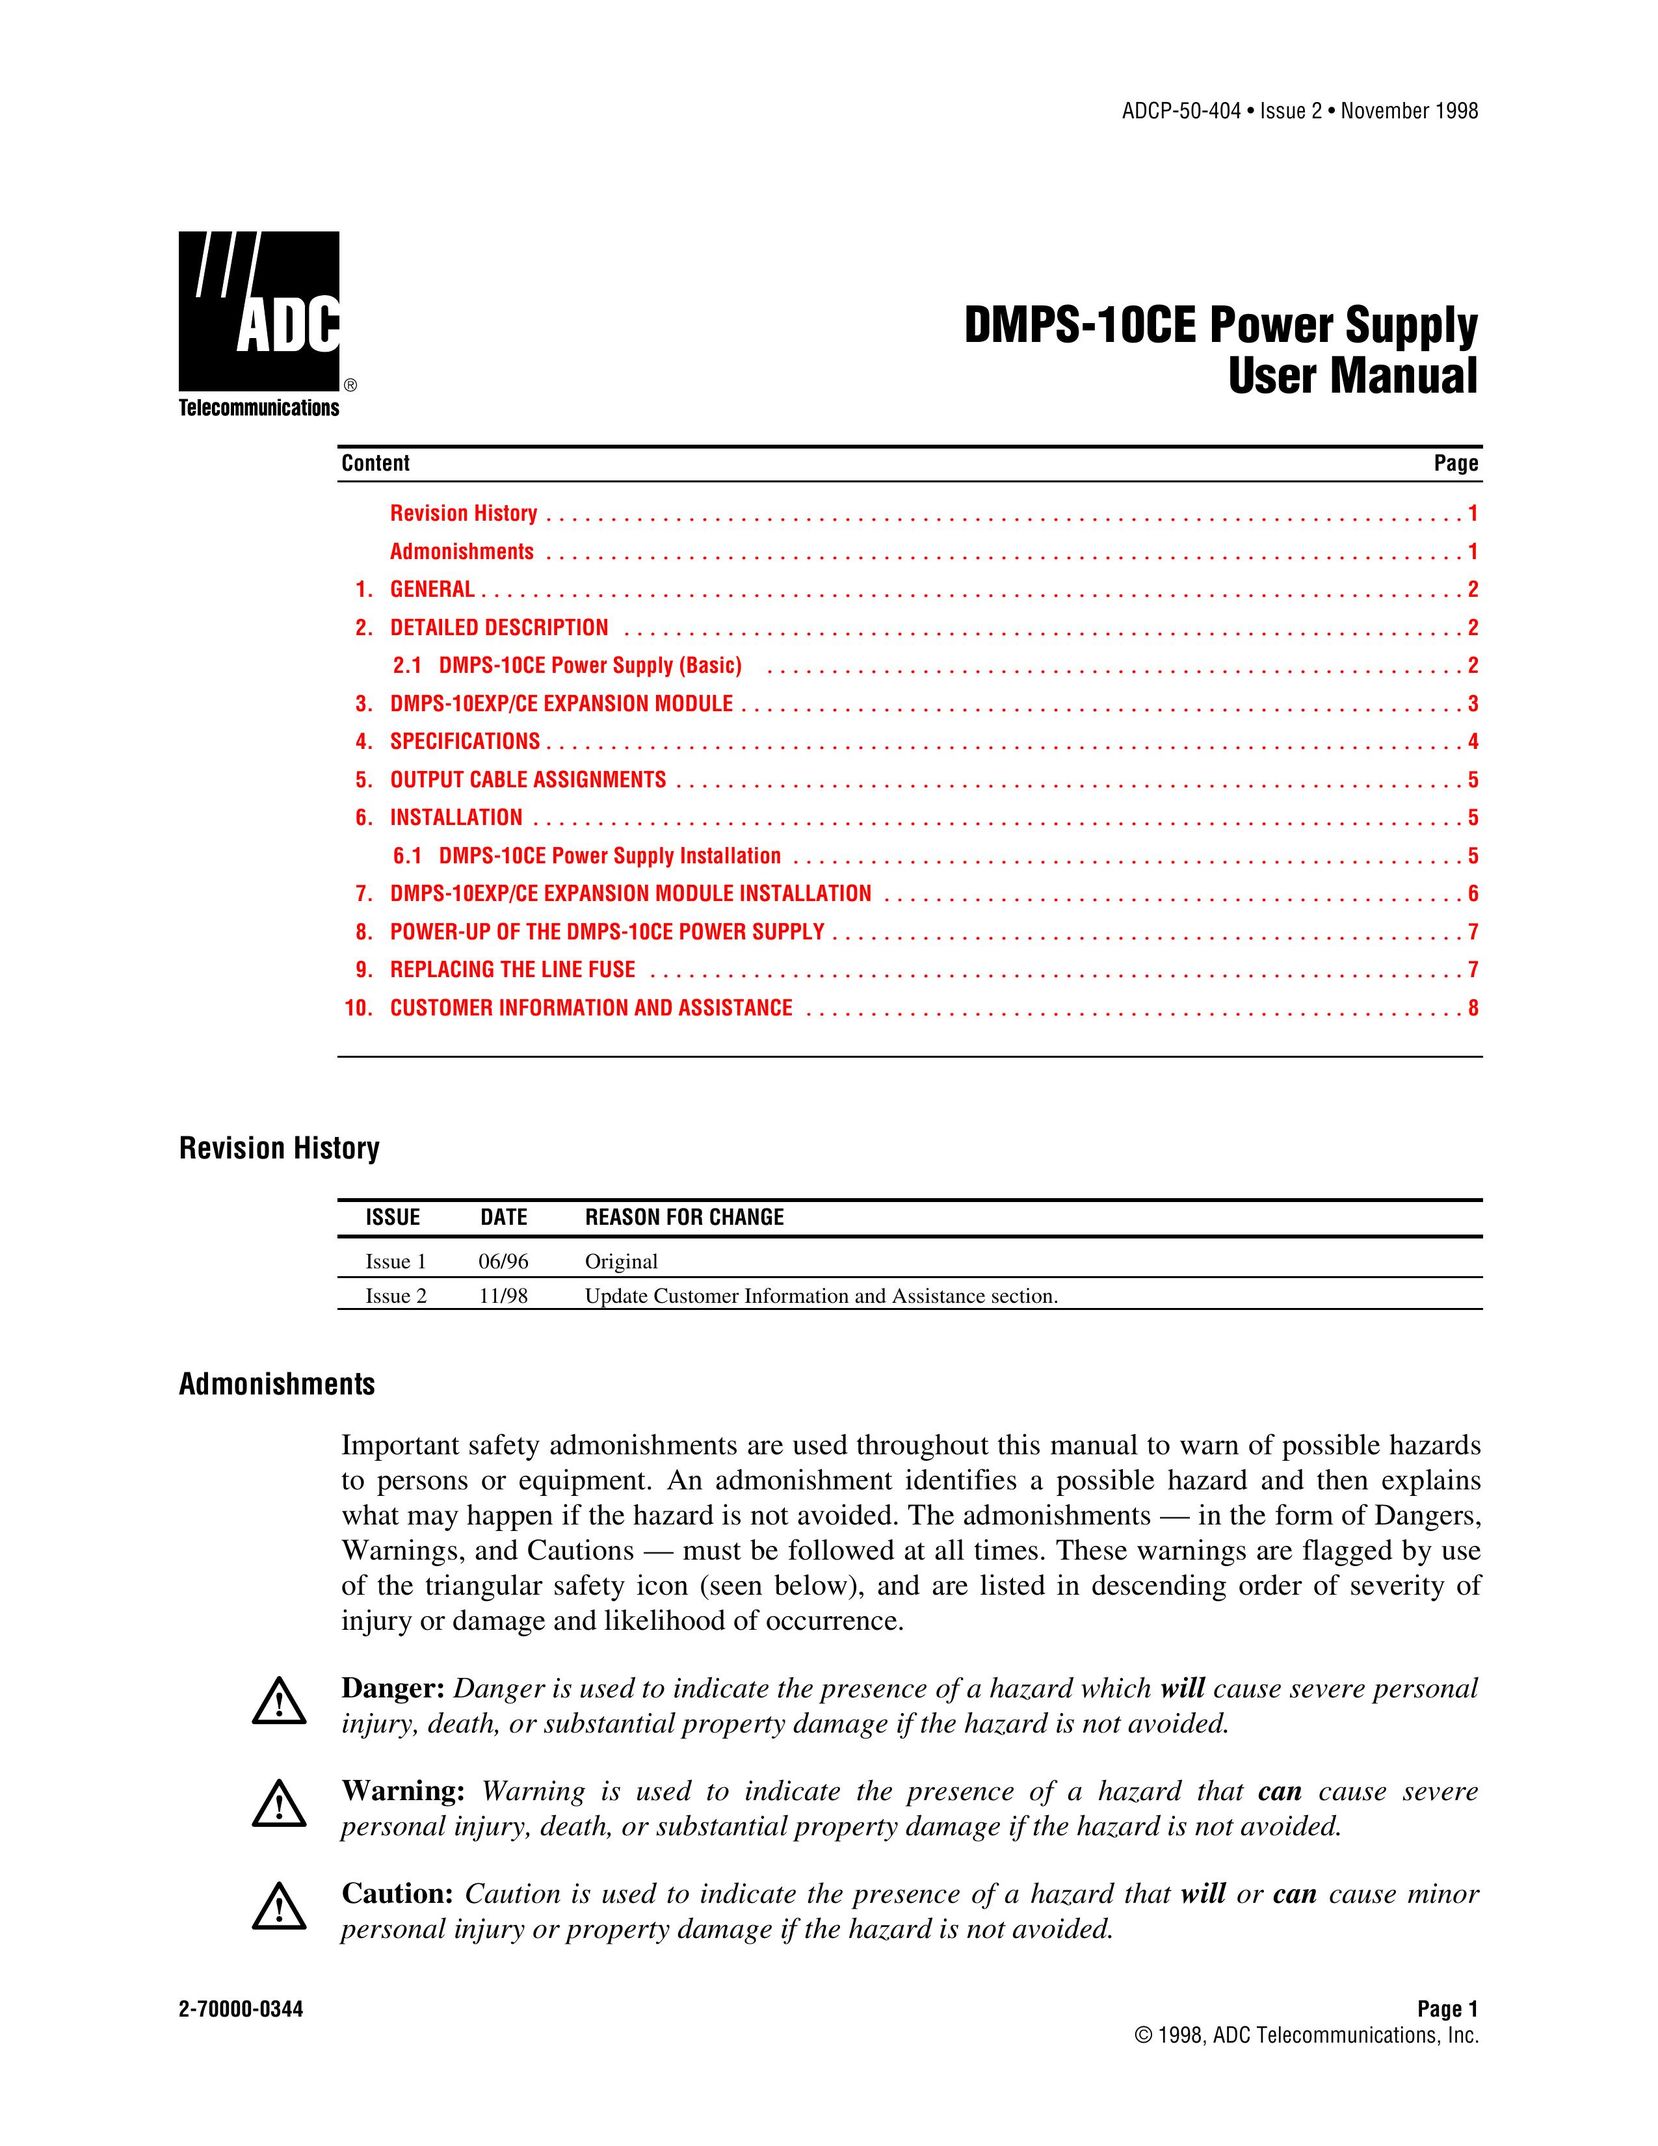 ADC DMPS-10CE Power Supply User Manual